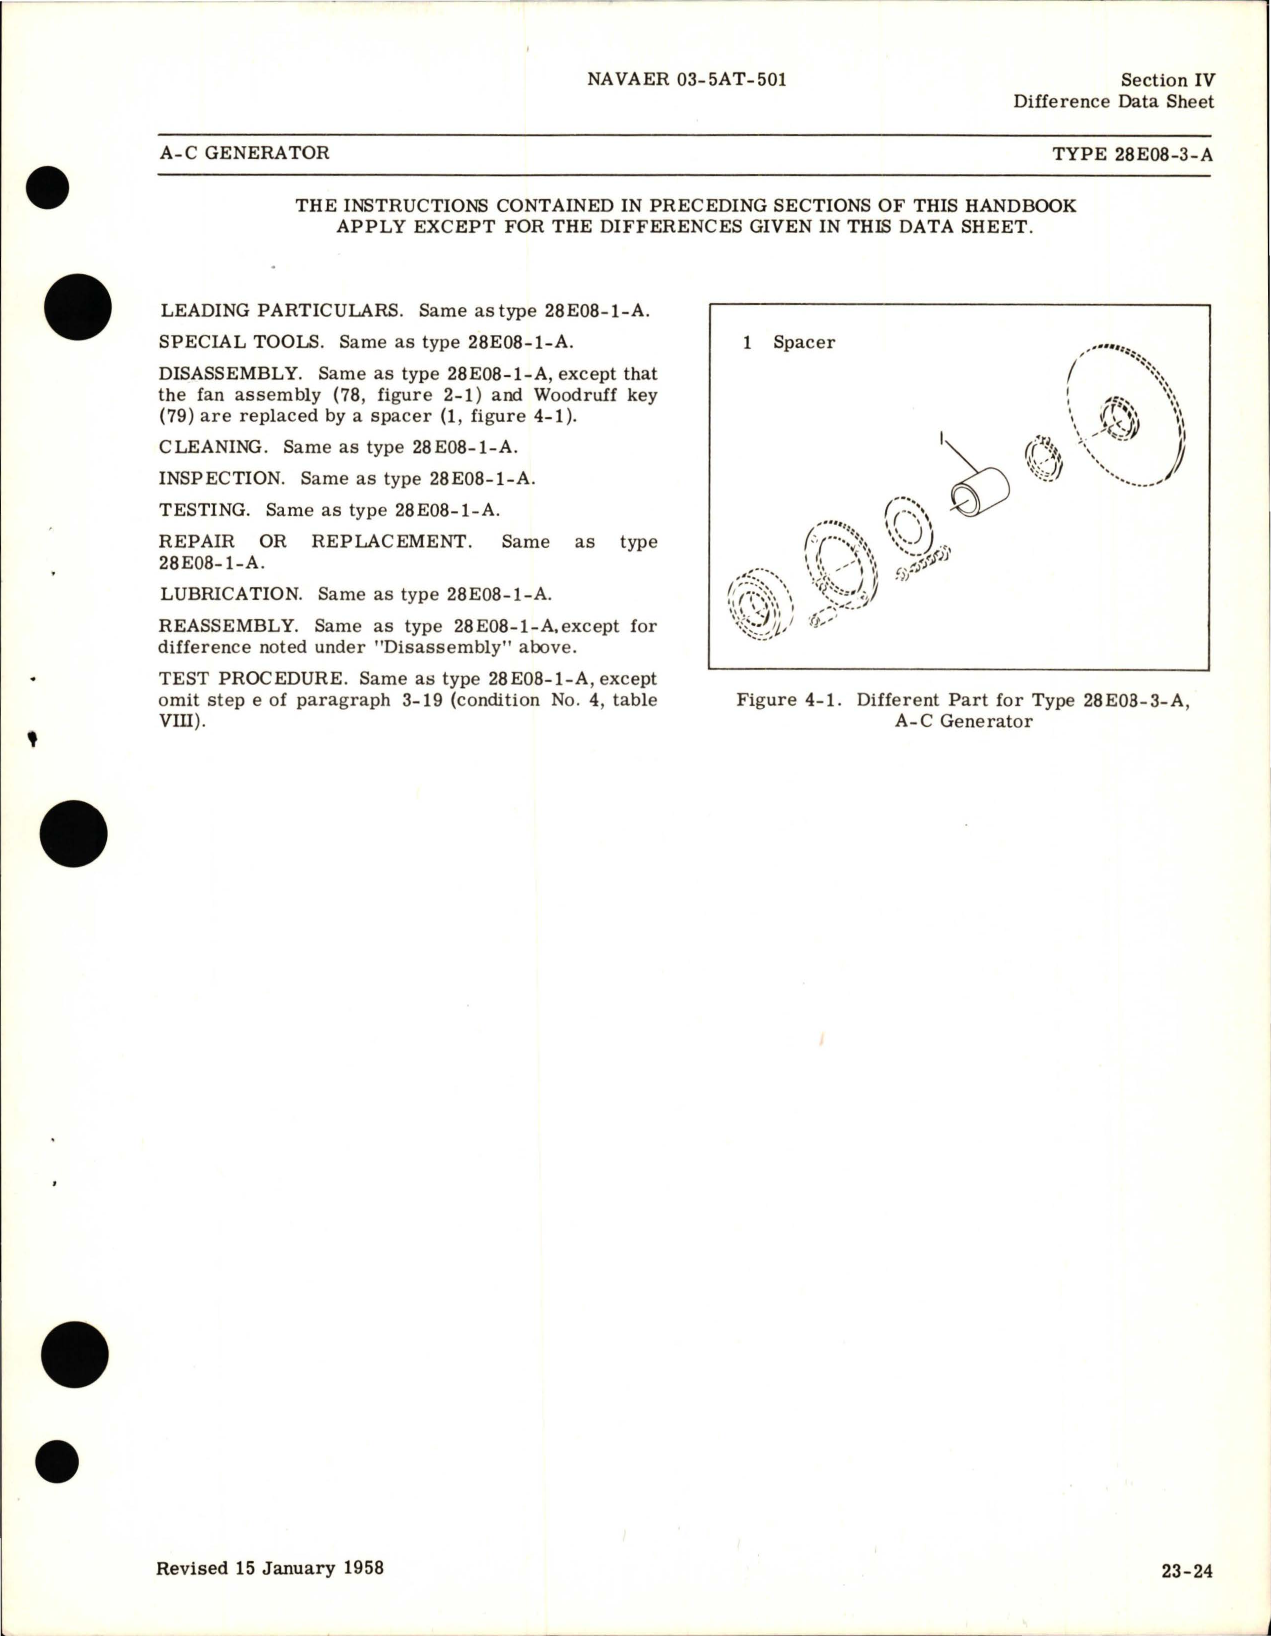 Sample page 5 from AirCorps Library document: Overhaul Instructions for A-C Generators for Types 28E08-1-A and 28E08-3-A